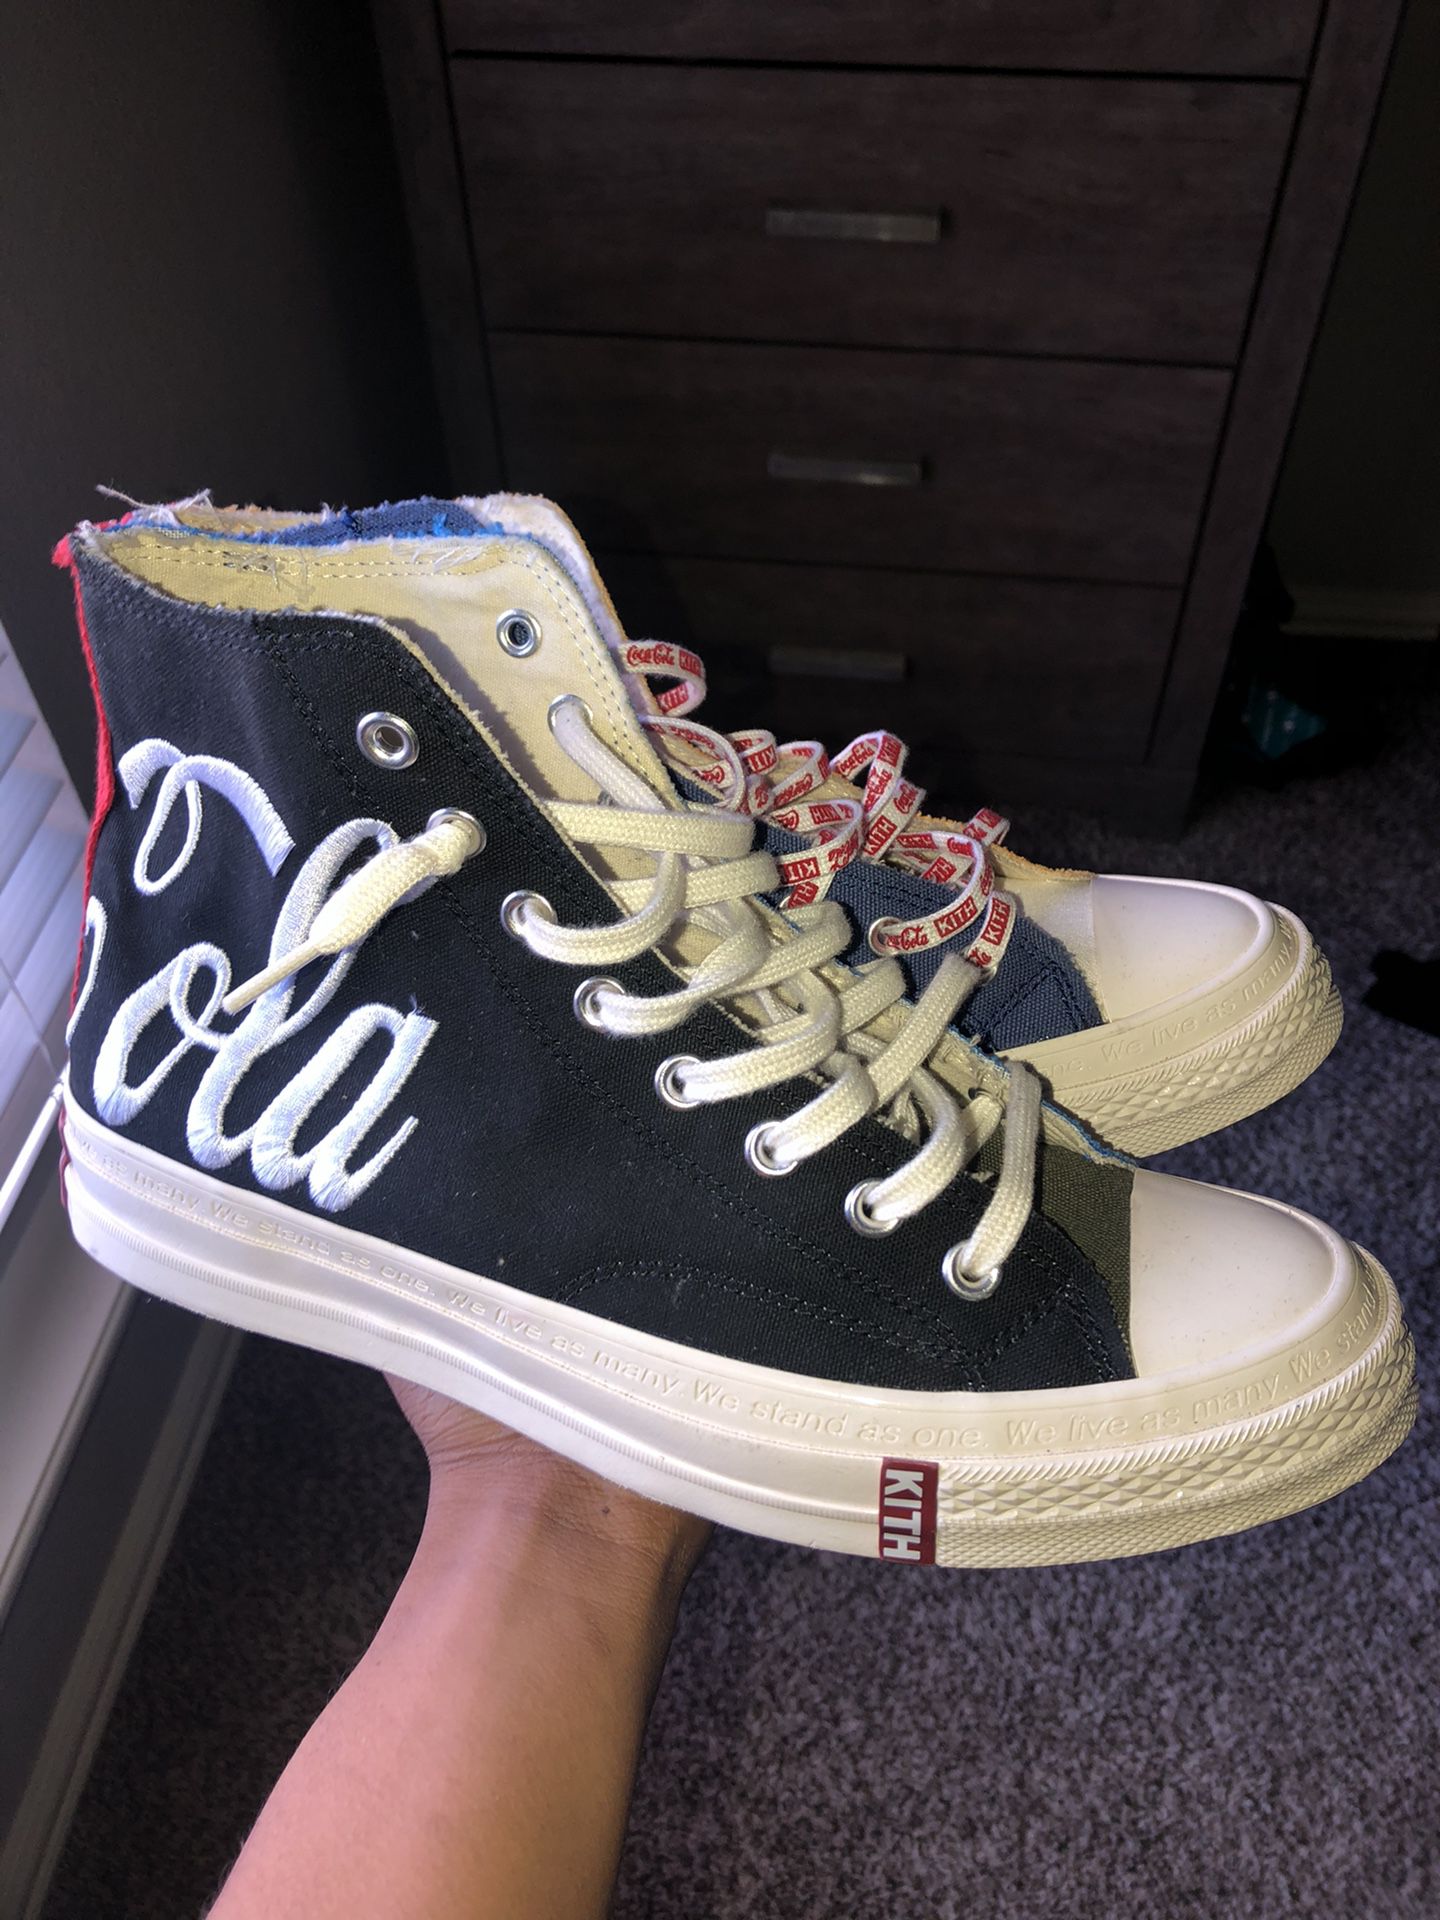 Converse x Coca Cola x Kith Friends and family sz 10